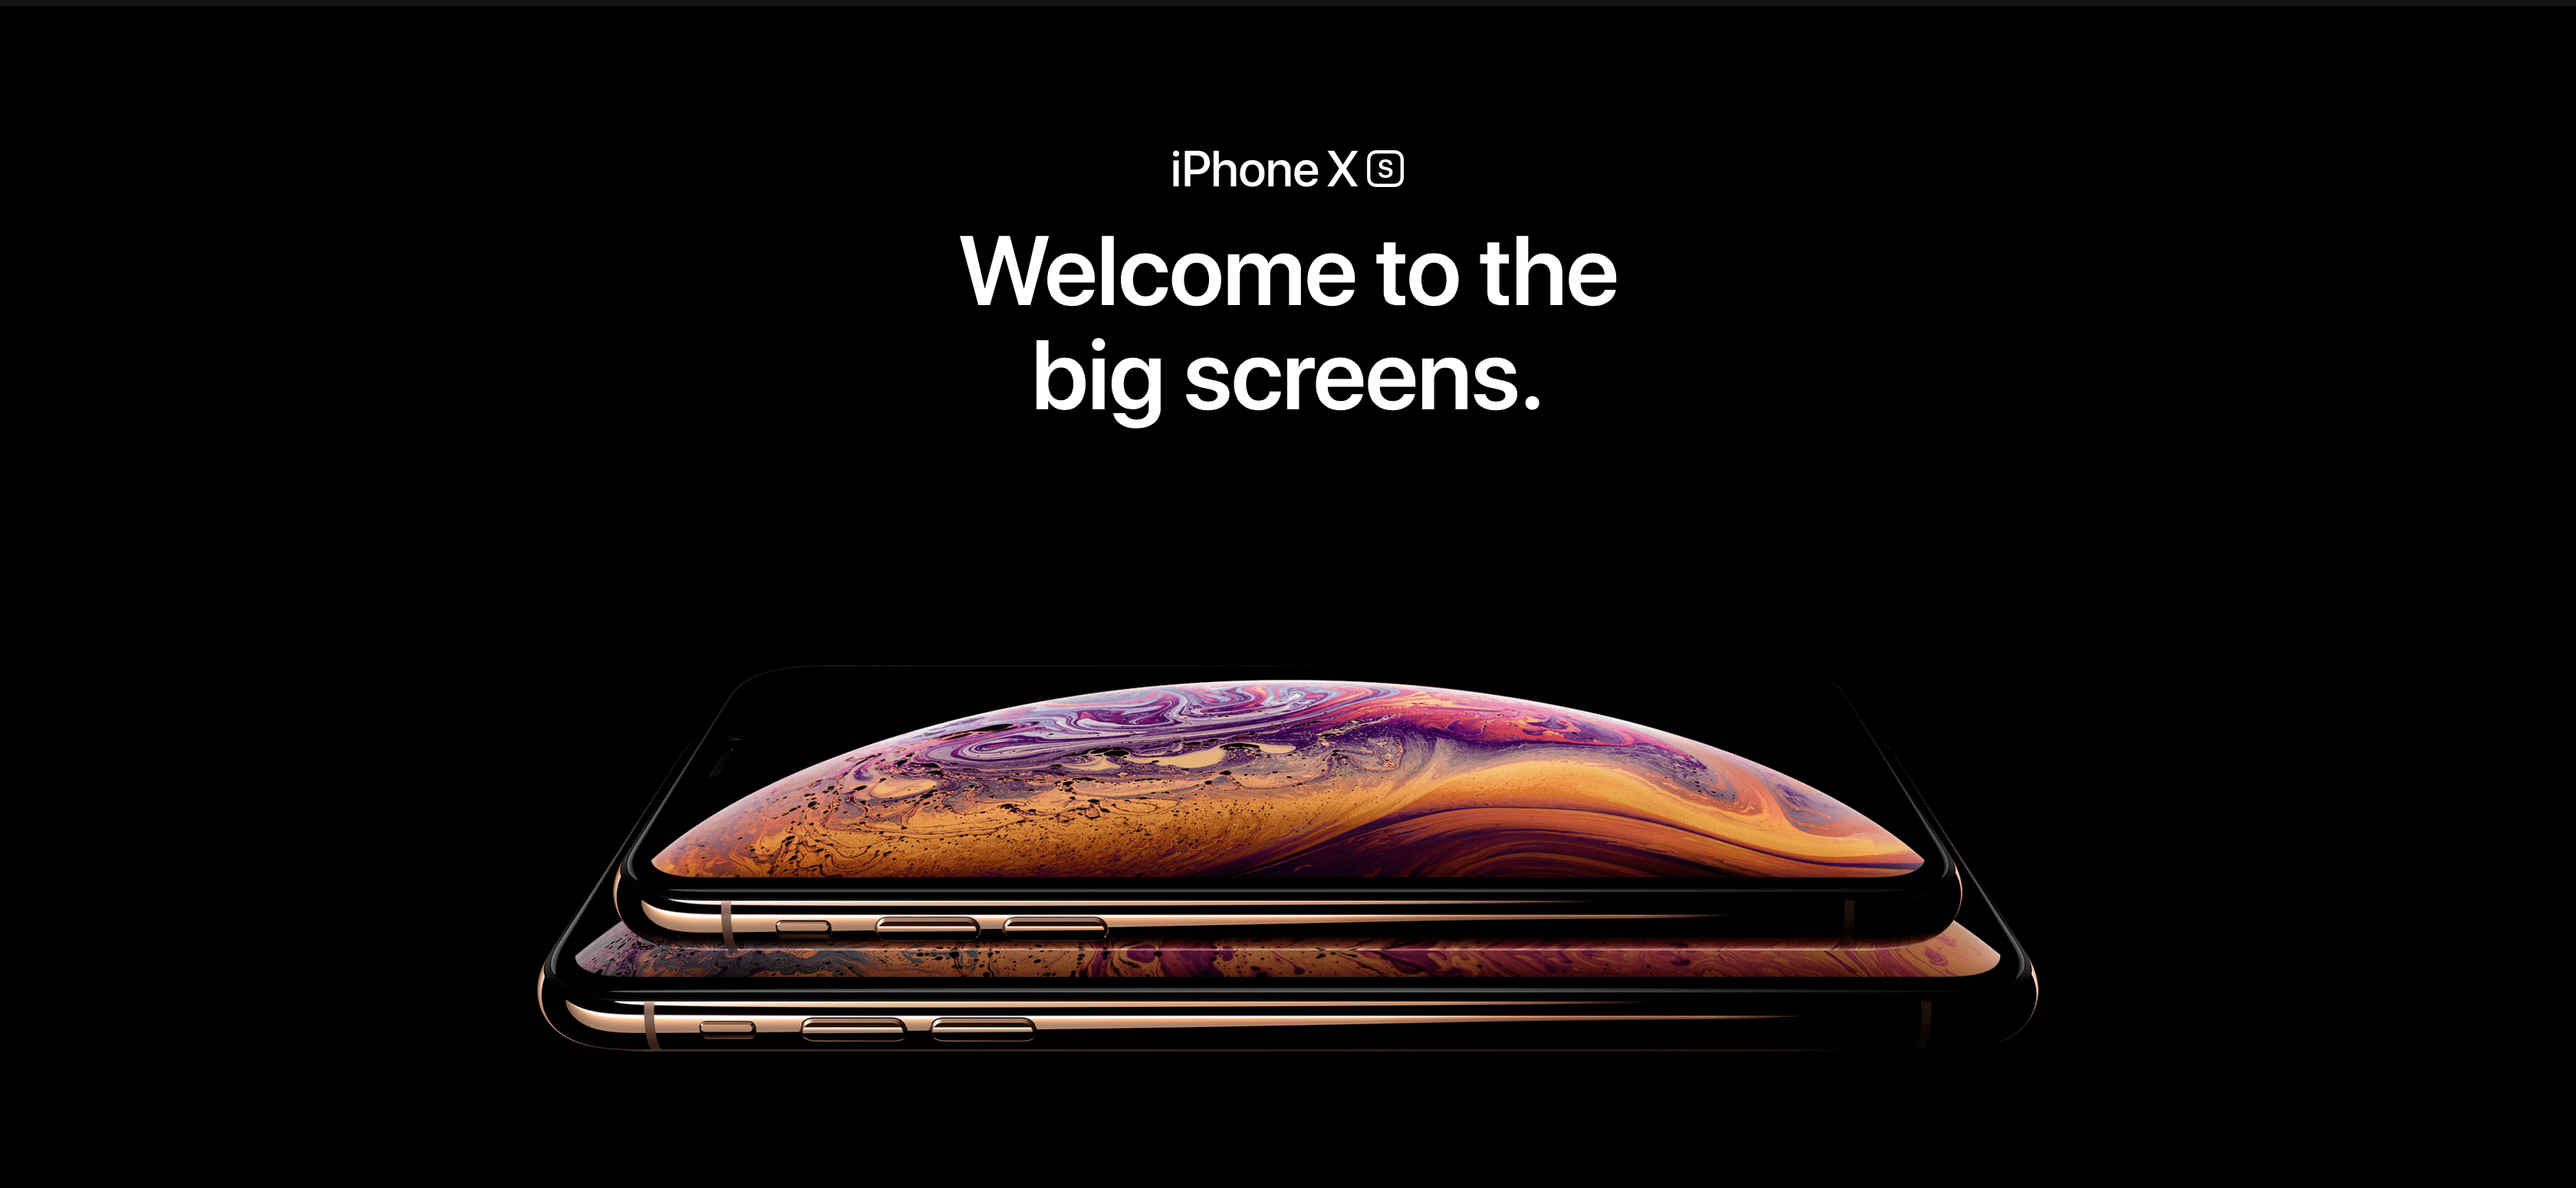 Apple iPhone XS and iPhone XS Max Specs and Prices, iPhone XS price in Nigeria, iPhone XS Max price in Nigeria, Buy iPhone XS online in Nigeria, Buy iPhone XS Max Online in Lagos. Buy Unlocked iPhone XS Max Online in Lagos and Abuja Nigeria